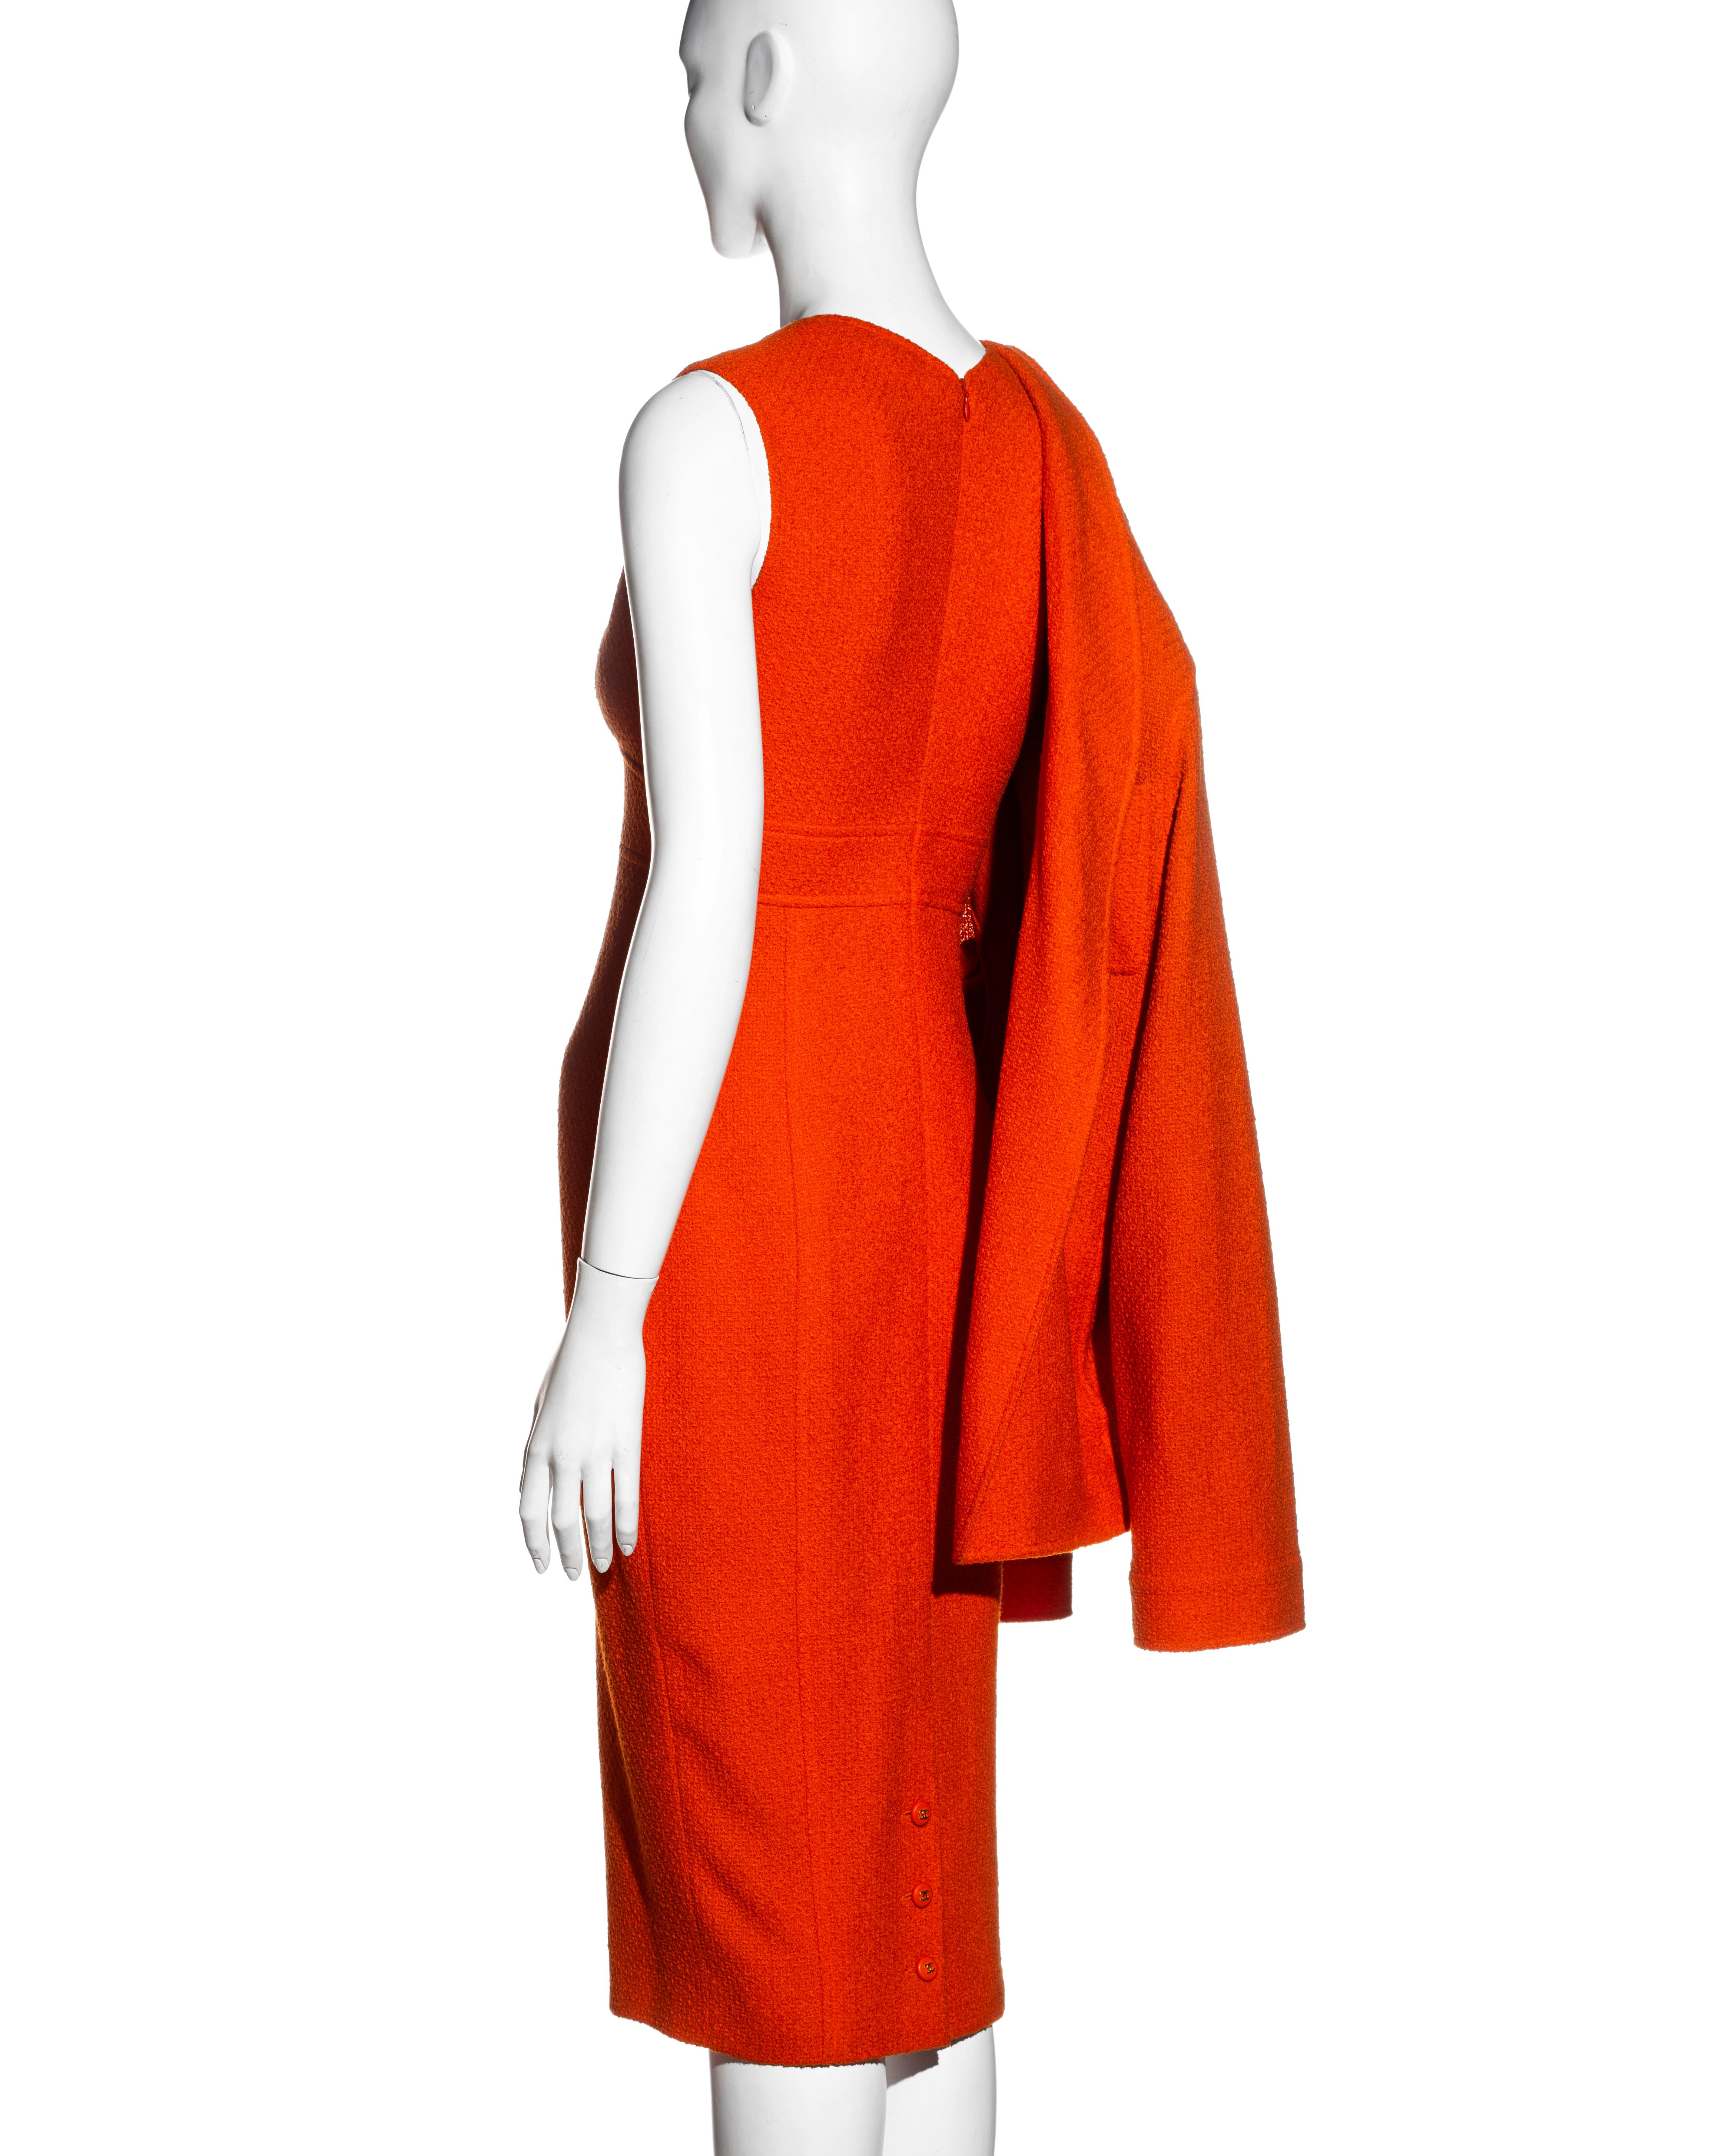 Chanel by Karl Lagerfeld orange bouclé wool dress and jacket set, fw 1995 For Sale 4